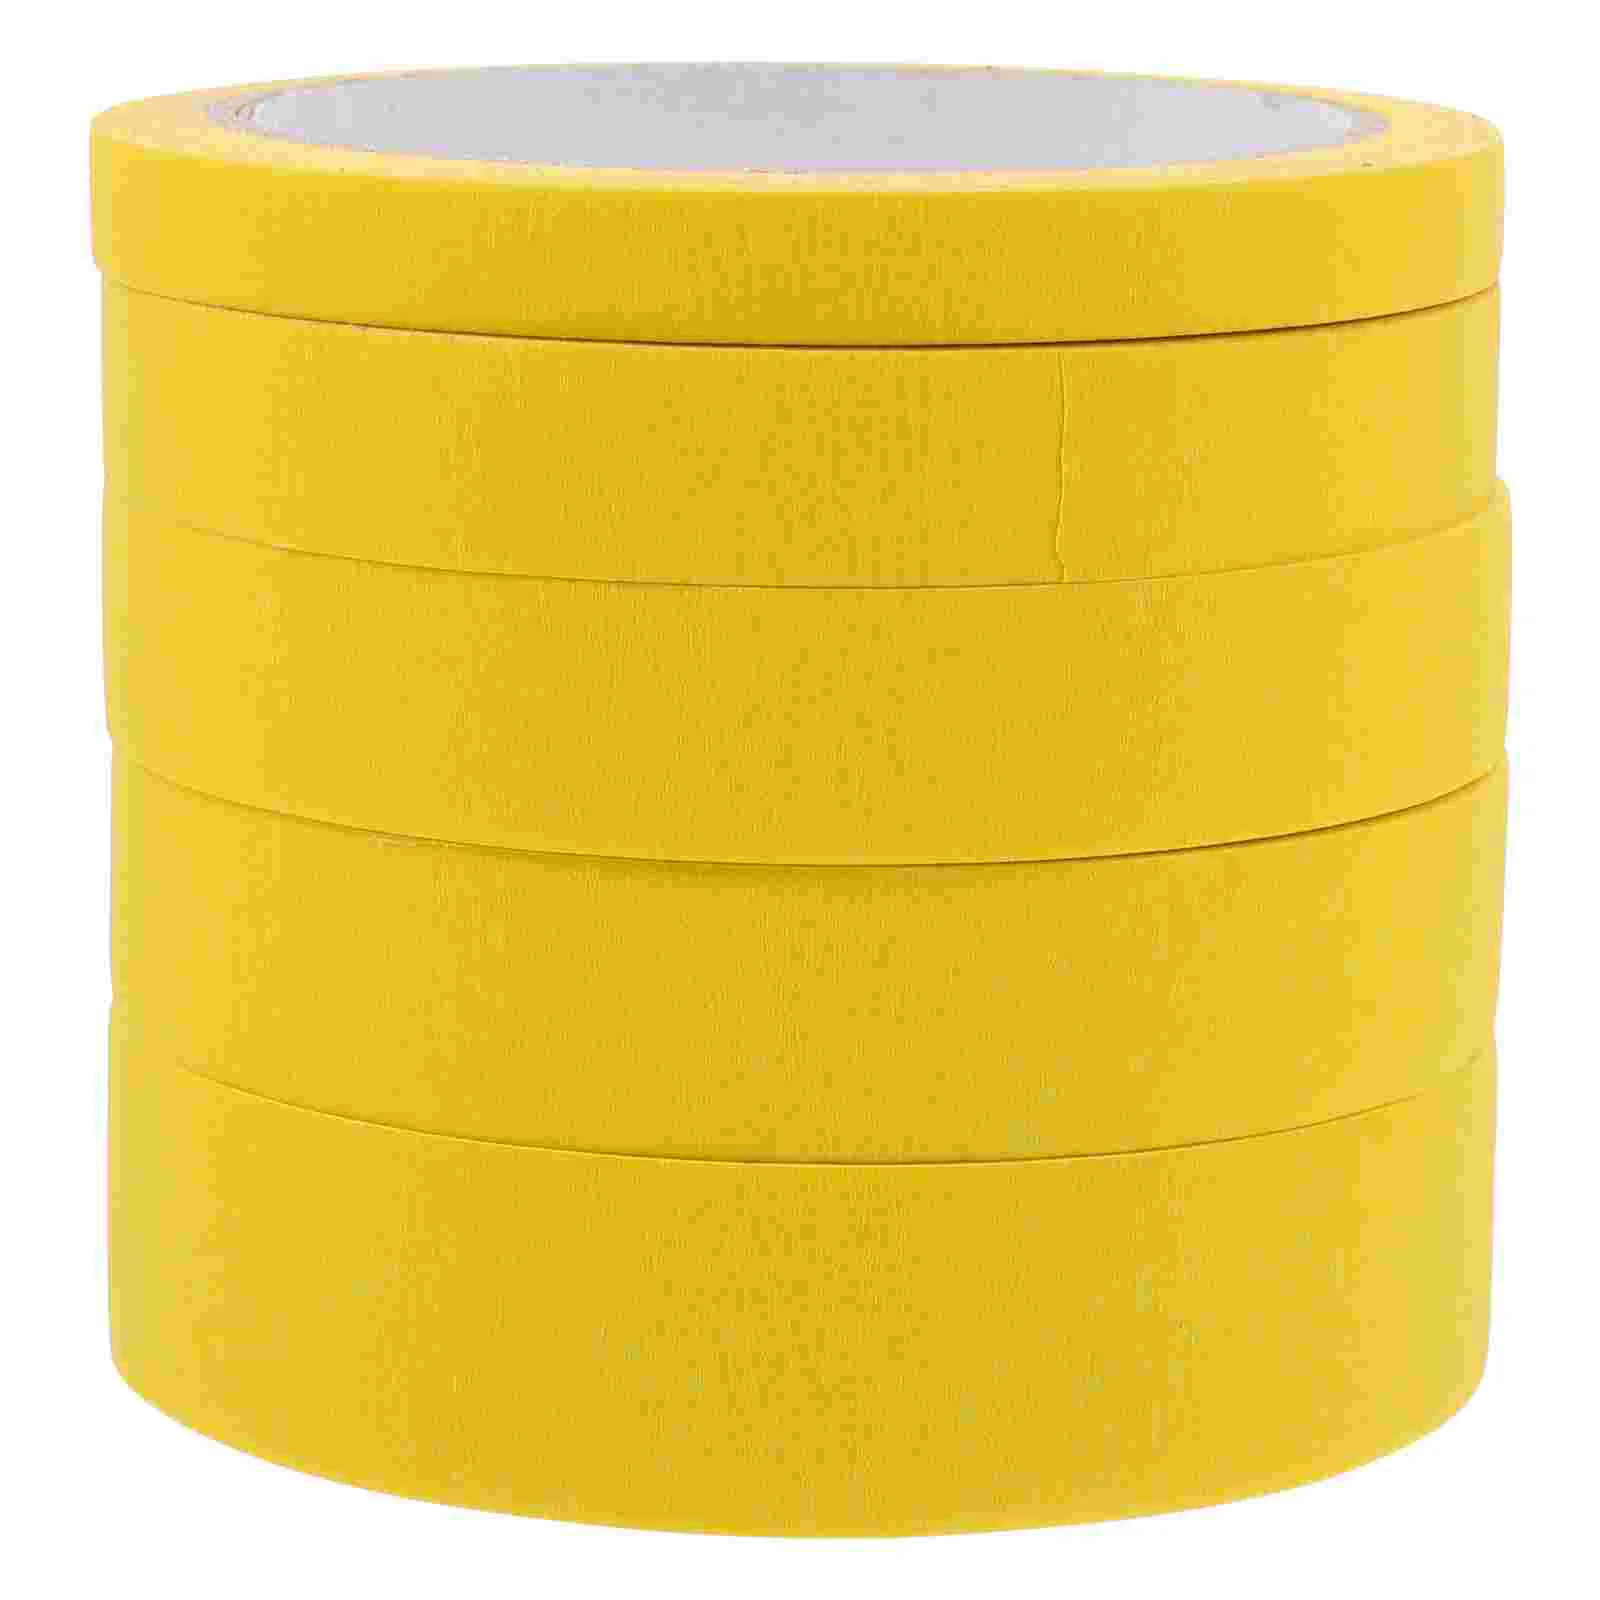 

5 Rolls Masking Tape Practical for Furniture Paper Spray Paint Textured Self-adhesive Tapes Crepe Durable